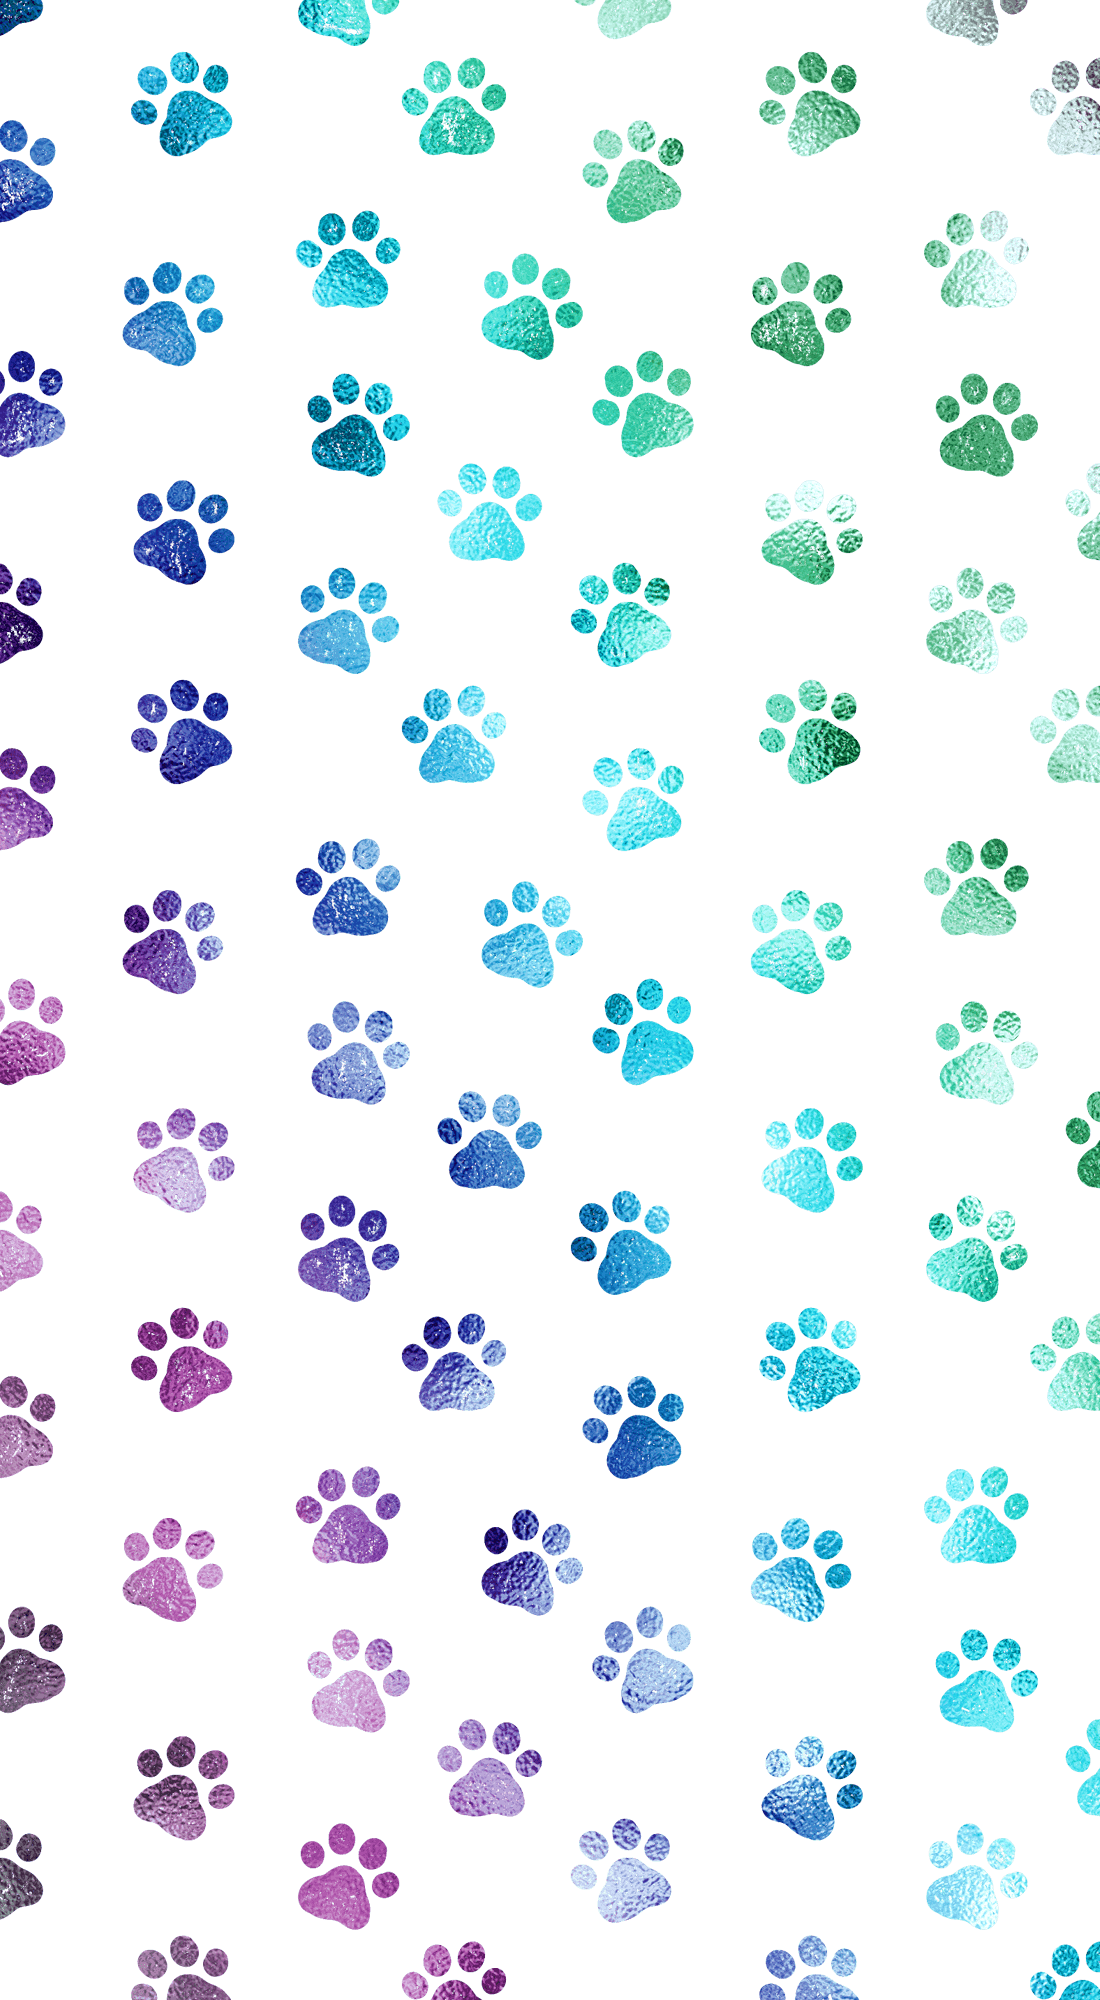 Ombre Paw Prints. CASETiFY animals. Dog wallpaper iphone